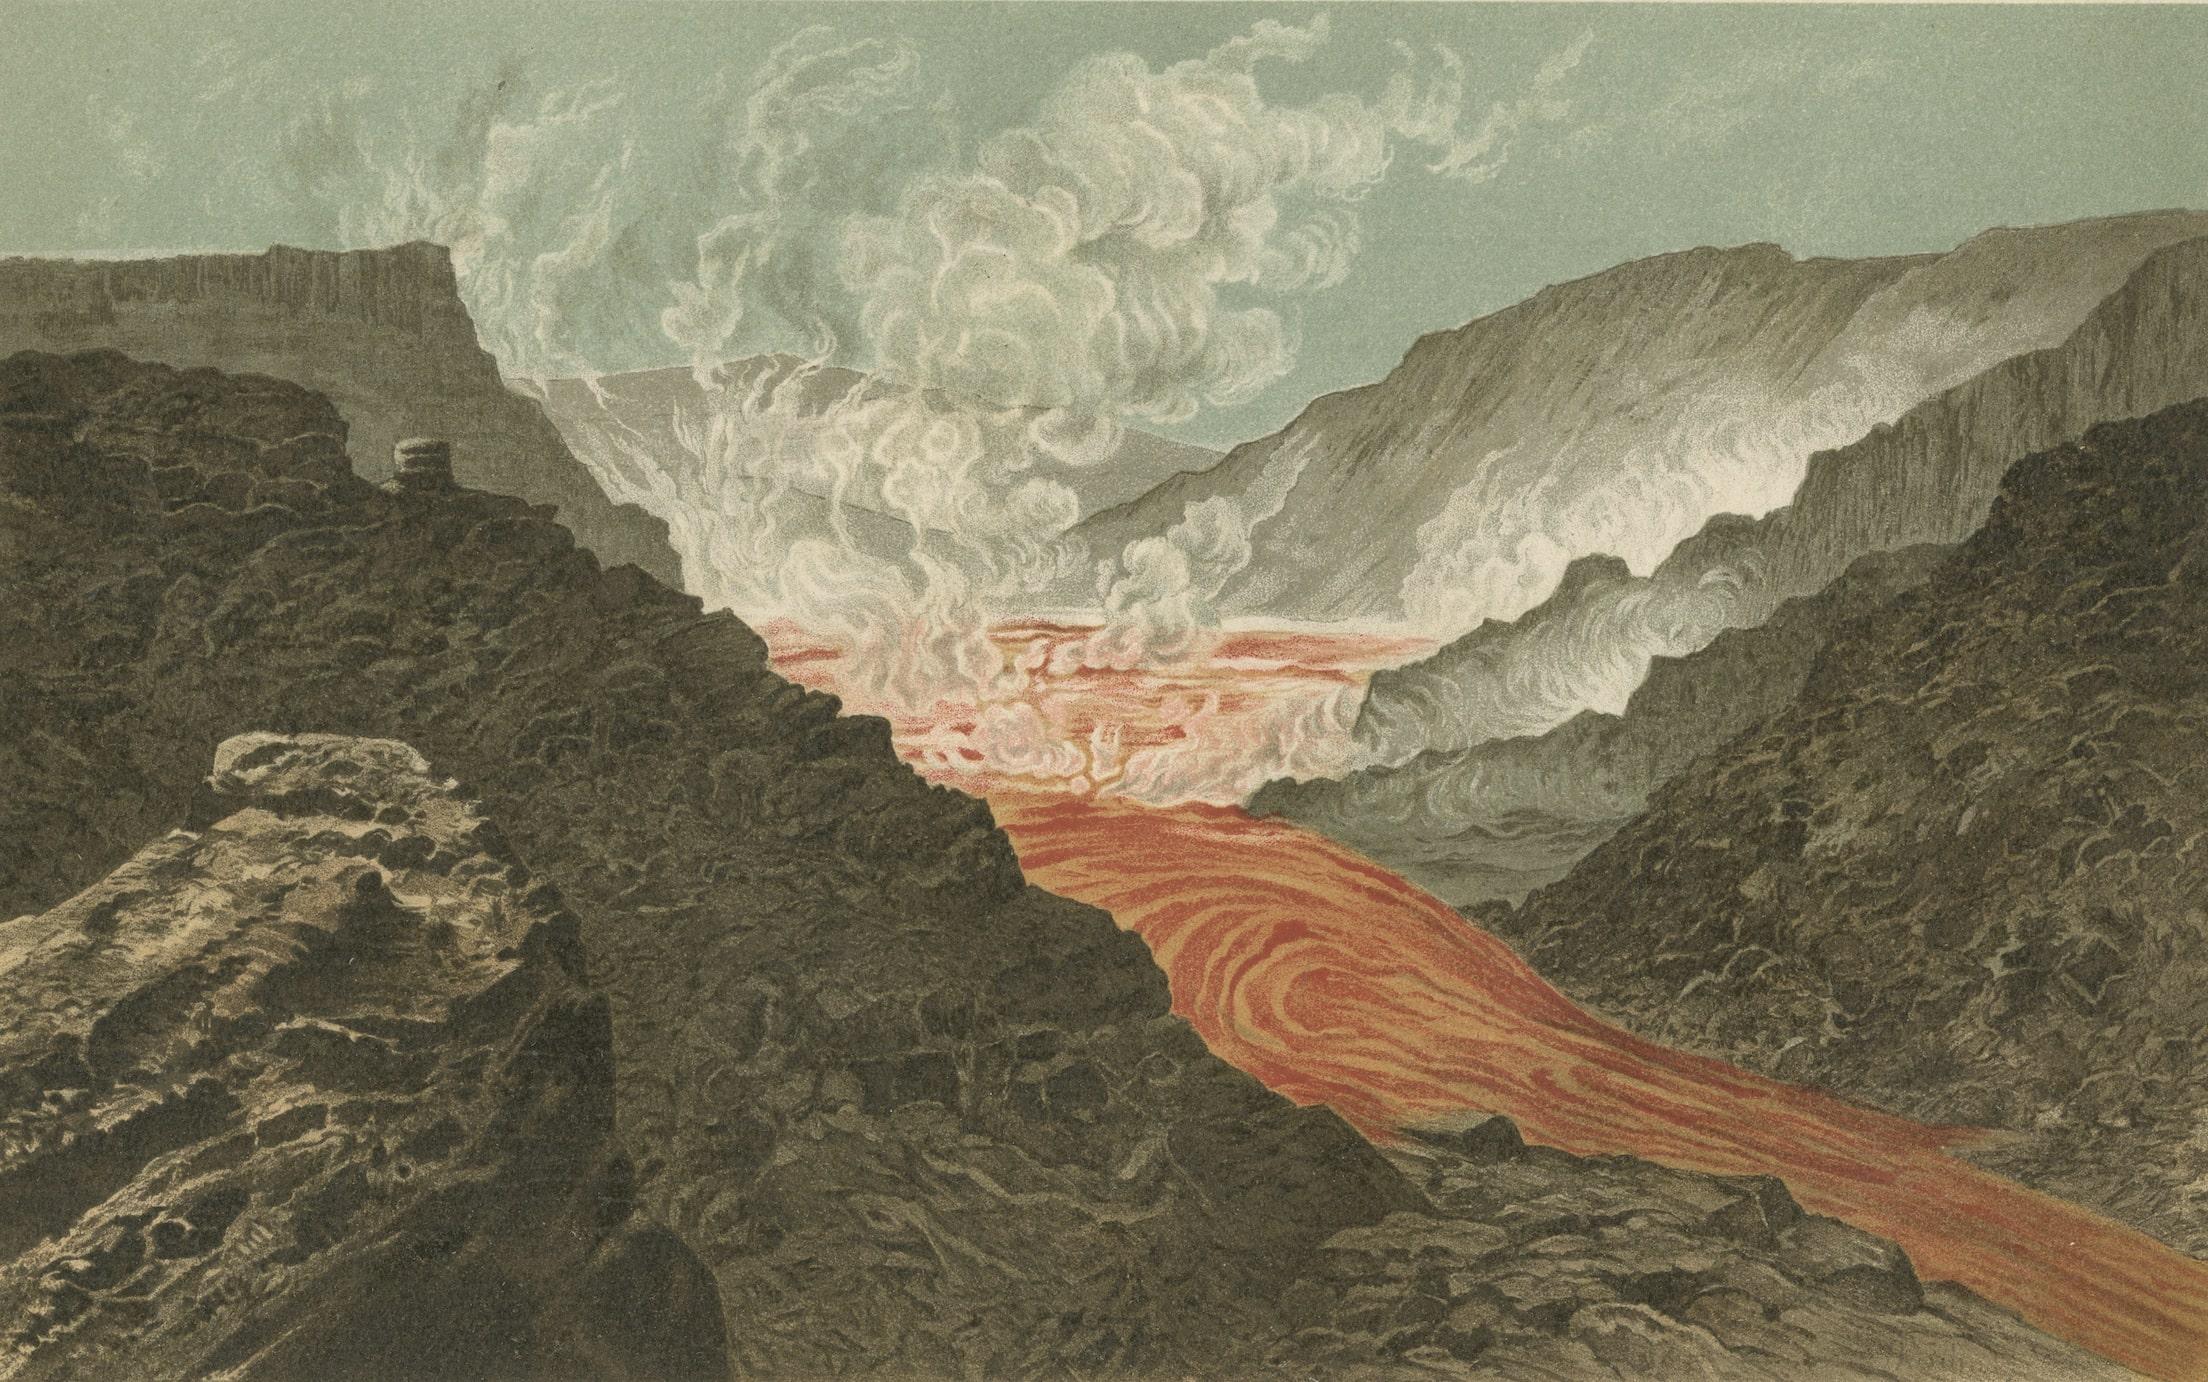 The image is an illustration of the Kilauea volcano in Hawaii, as indicated by the German caption 